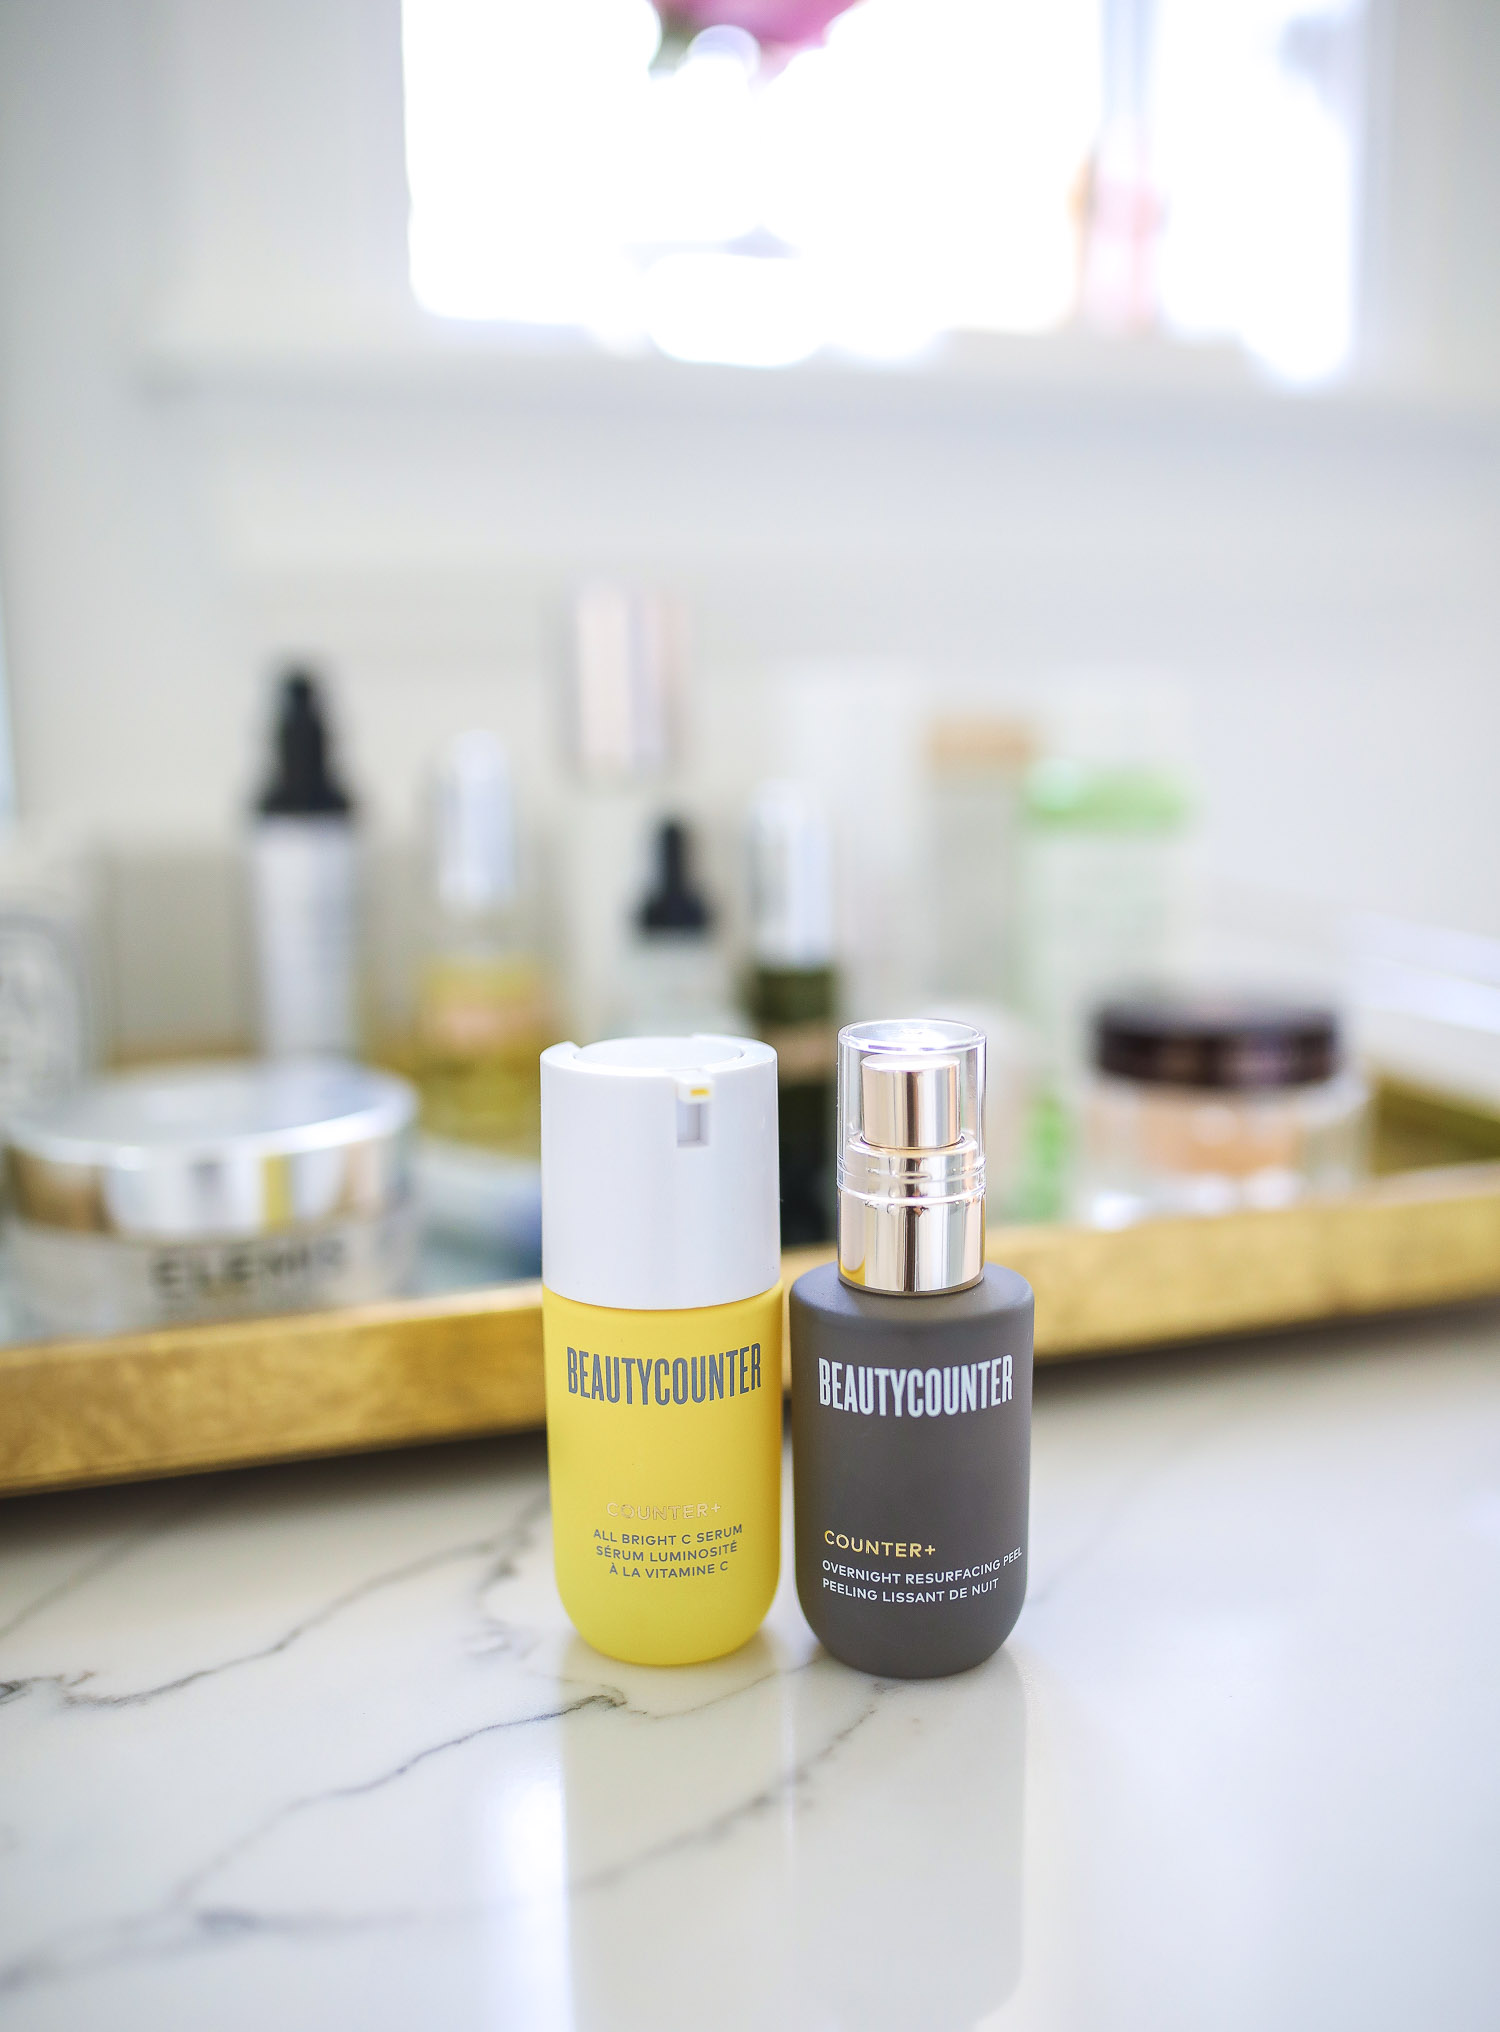 beauty counter review vitamin C, Beauty Counter Sephora overnight resurfacing gel, emily ann gemma |  Beautycounter Products by popular US beauty blog, The Sweetest Thing: image of Beautycounter Counter+ Overnight Resurfacing Peel and Beautycounter Beautycounter Counter+ All Bright C Serum.